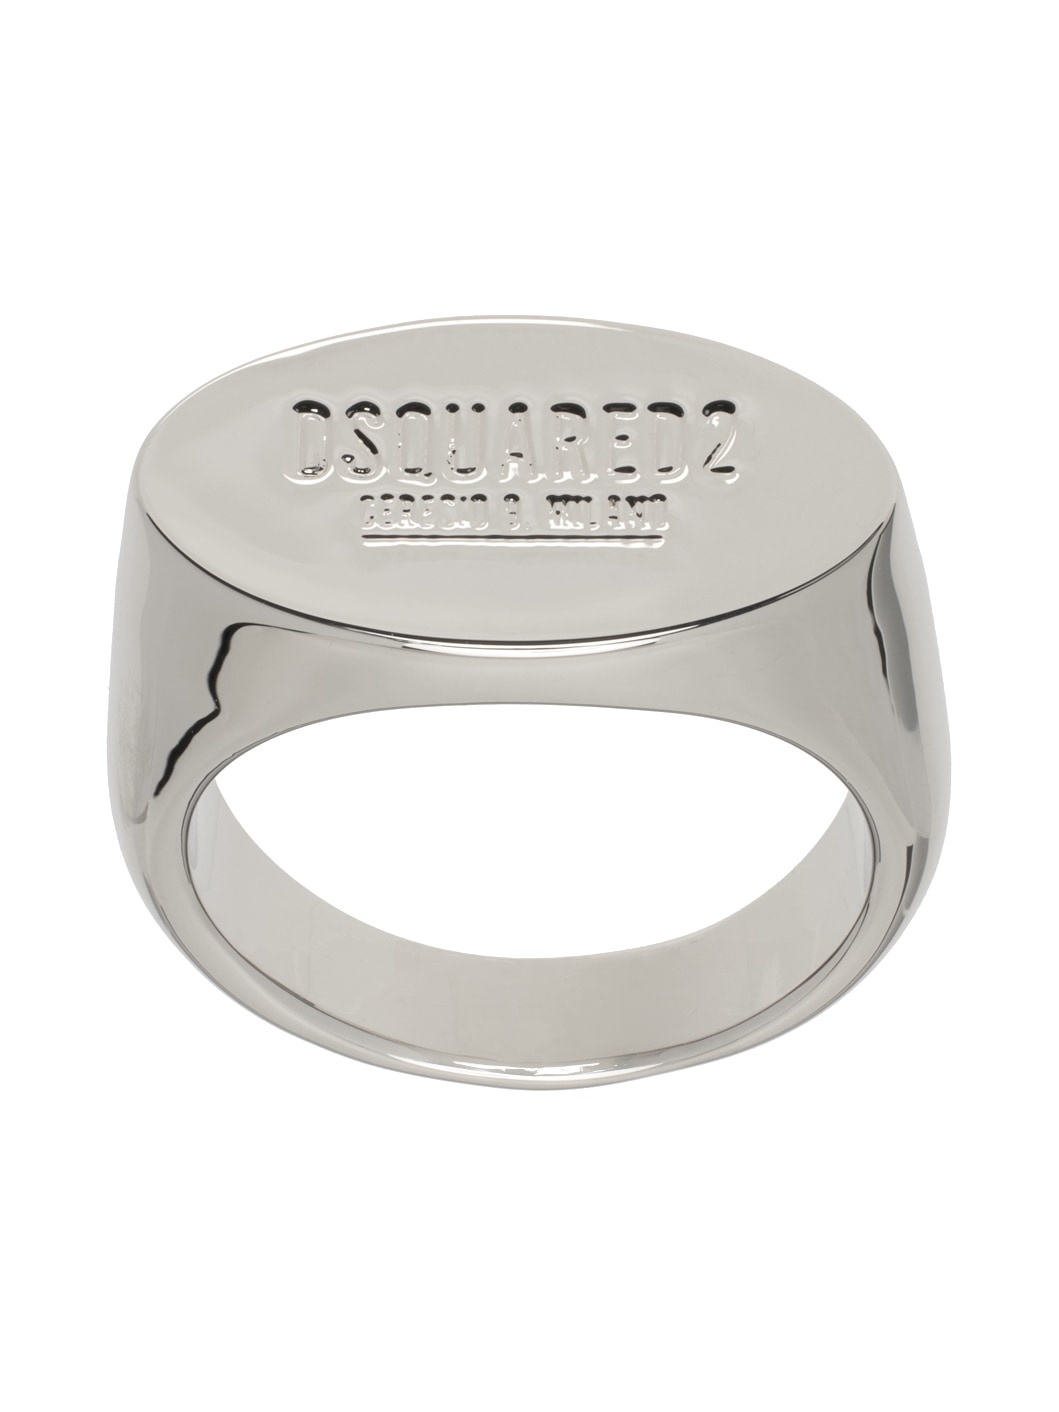 Silver D2 Tag Chain Ring - 1